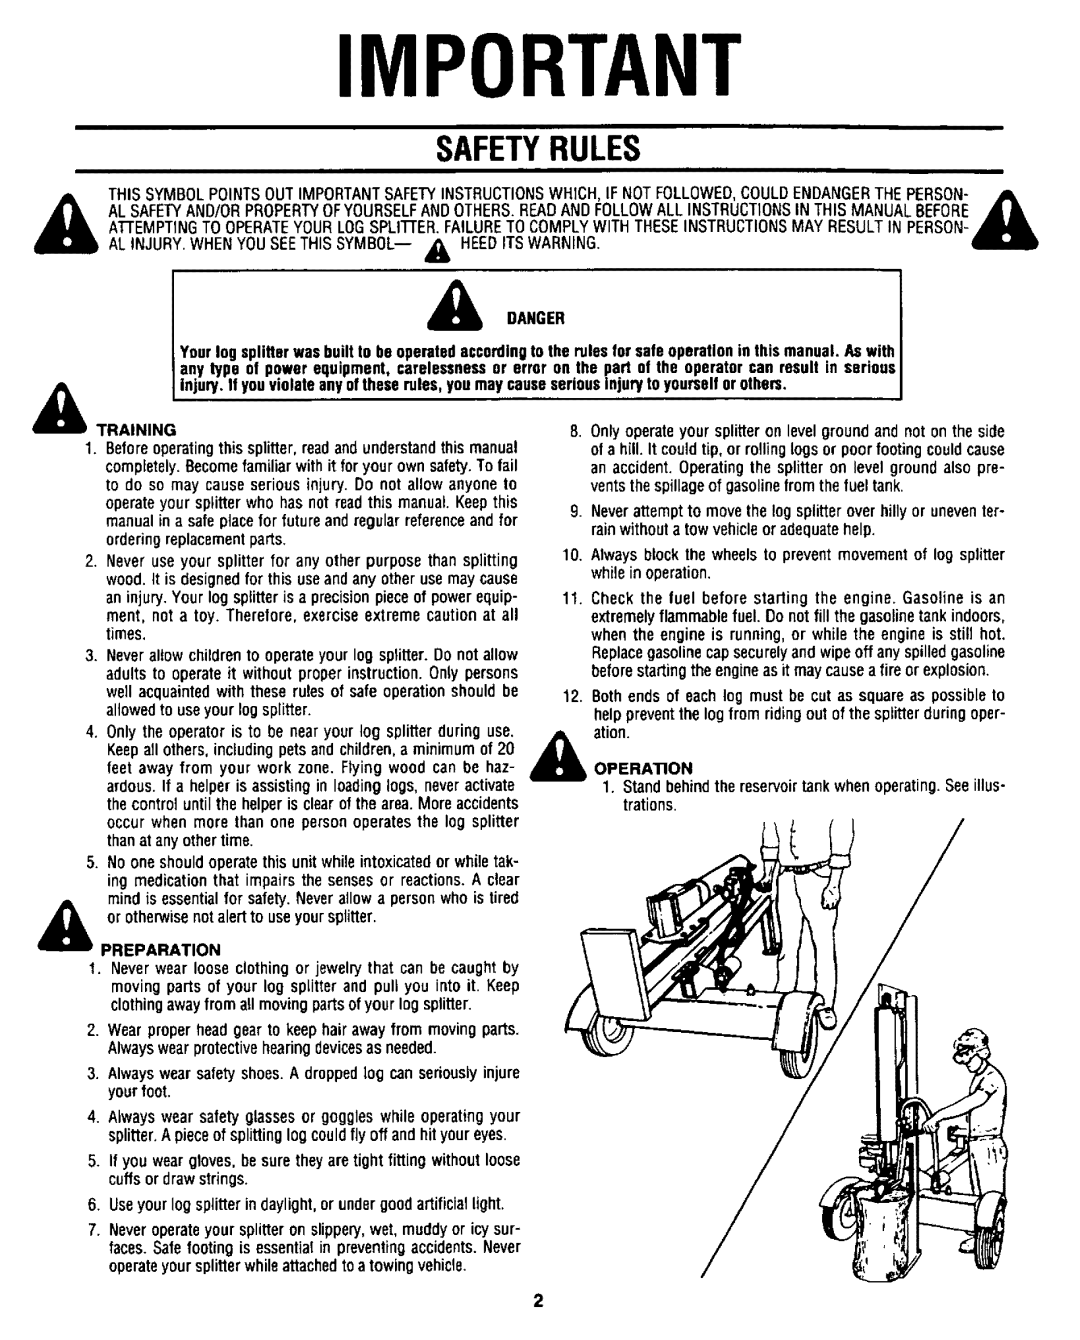 Sears 247.34625 owner manual Safetyrules, Importan 